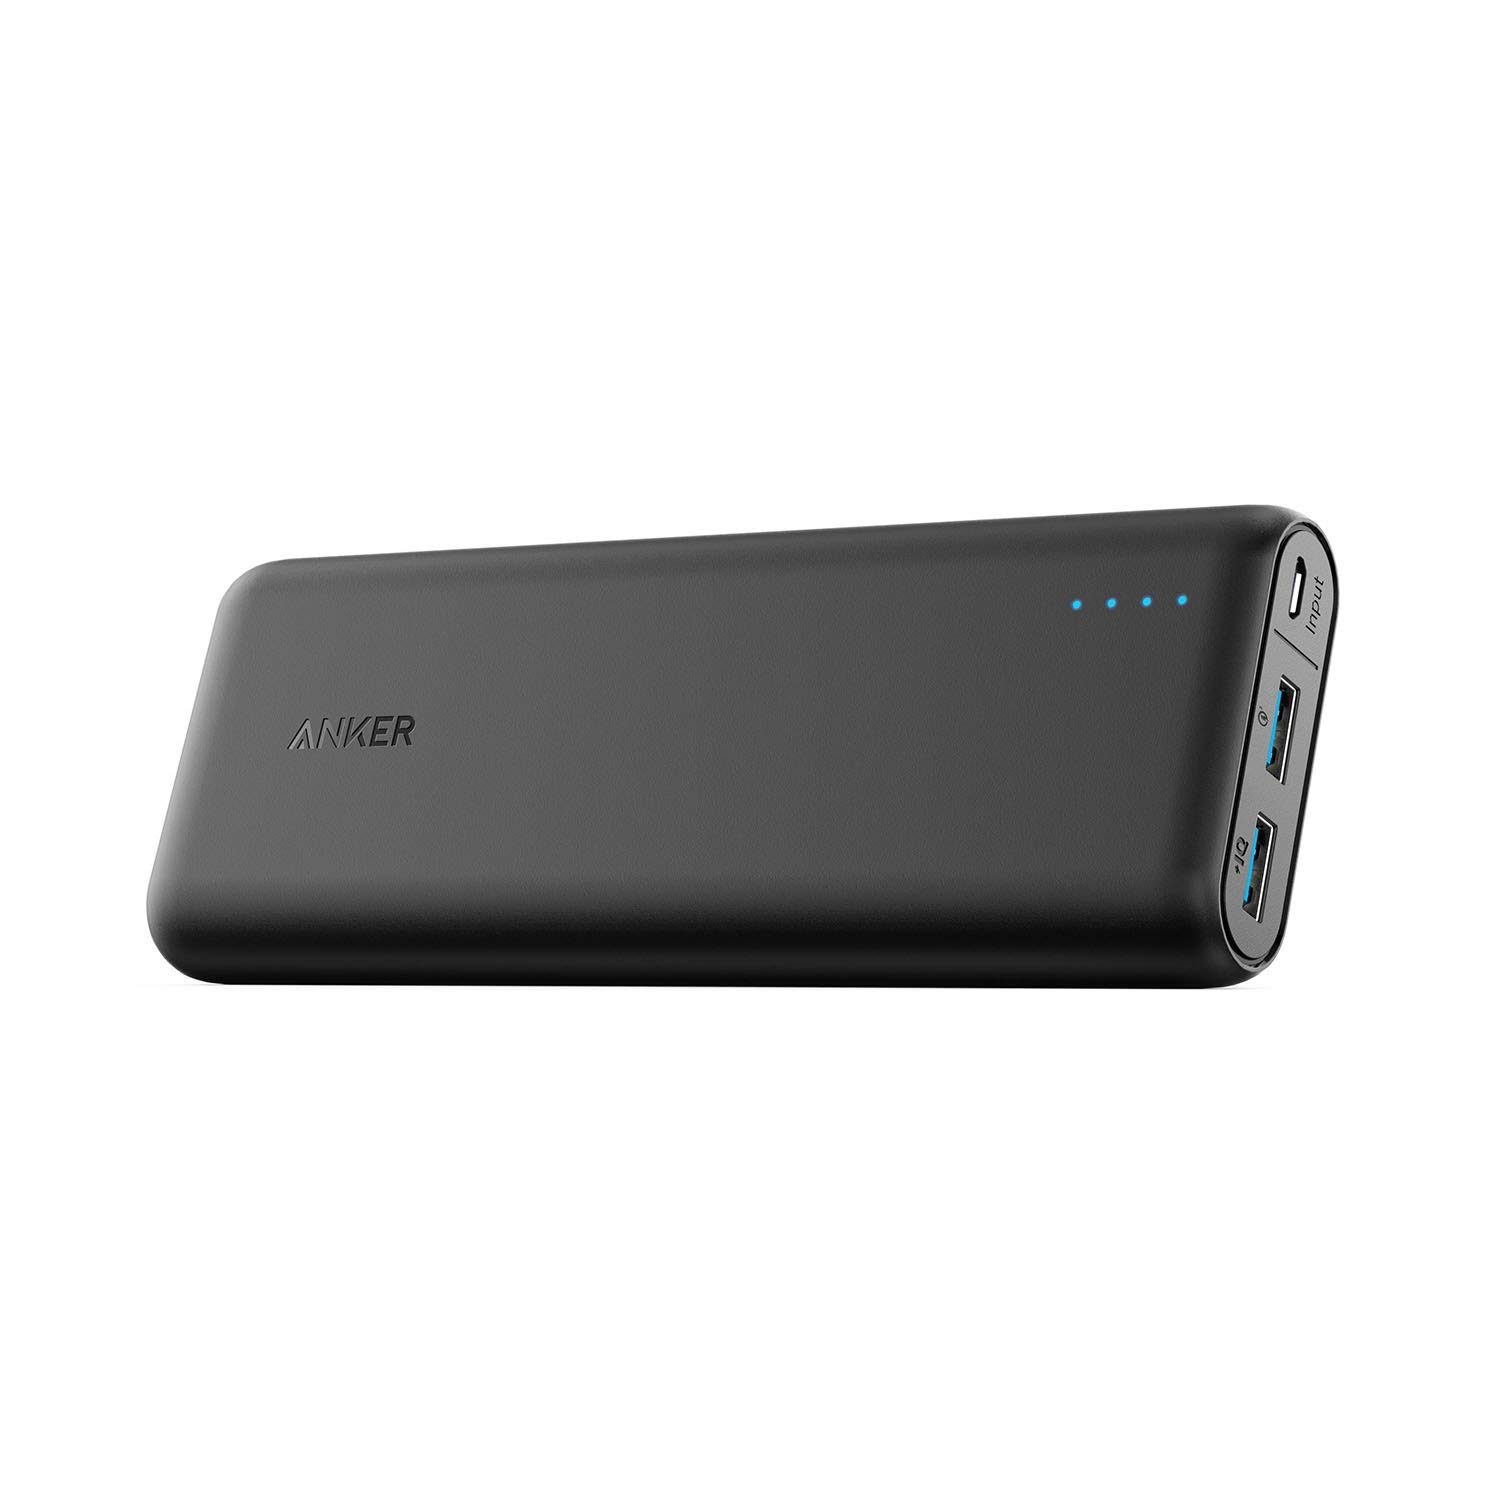 Anker PowerCore Speed 20000 20000mAh Qualcomm Quick Charge 3 0  PowerIQ Portable Charger with Quick Charge Recharging Power Bank for Samsung iPhone iPad and More